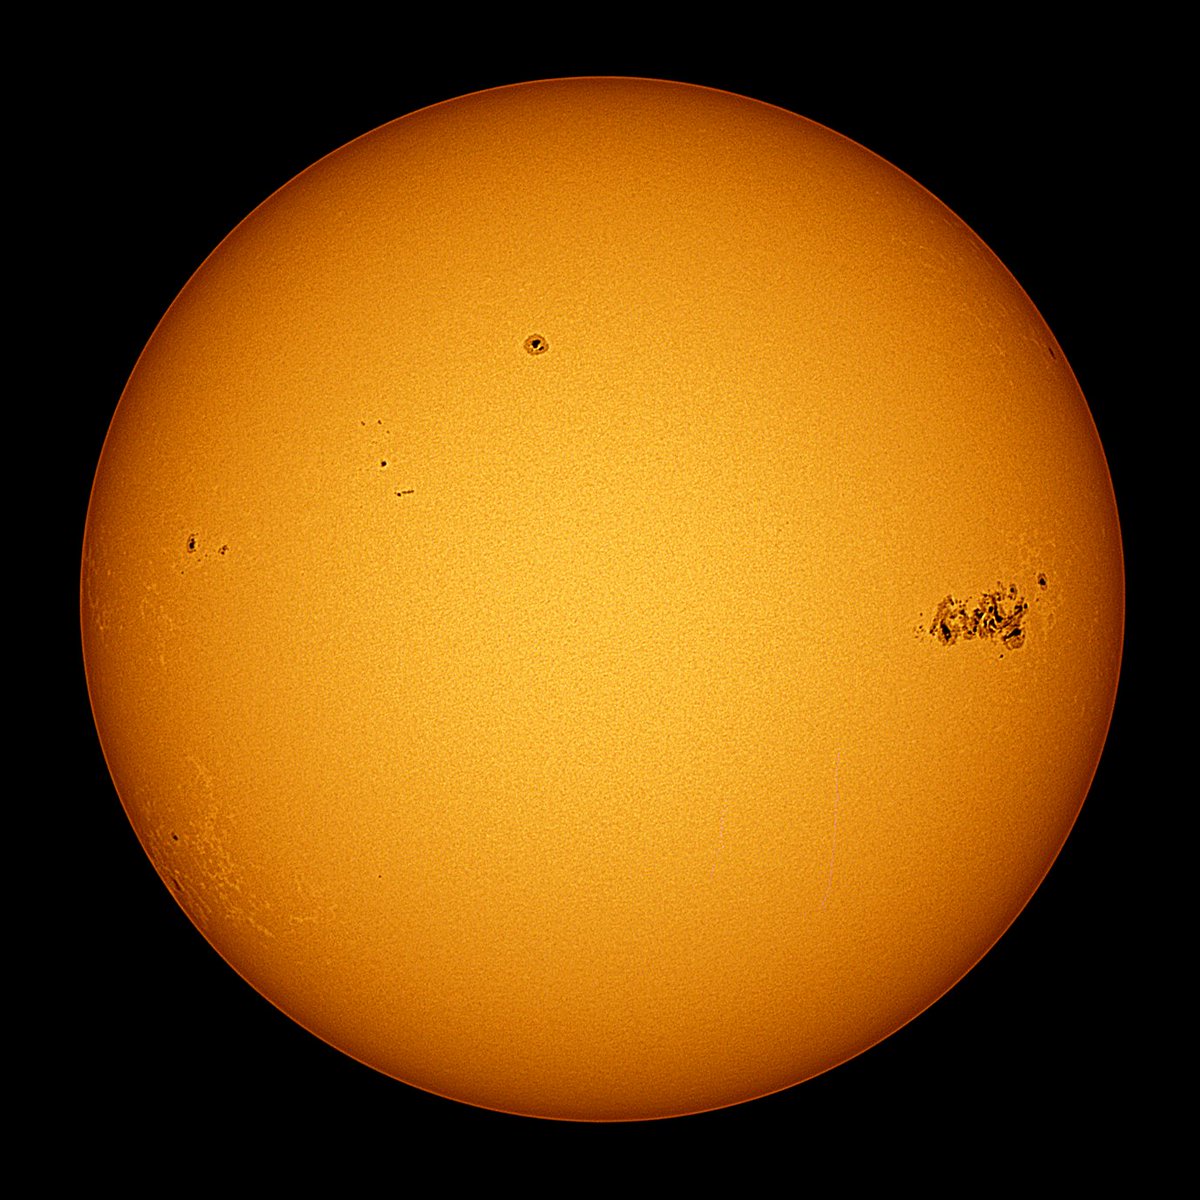 Here is the Sun captured last Friday from Evanston, featuring Active Region 3664, the GIANT sunspot responsible for the auroras this weekend. The first photo is my first attempt at shooting our star in Hydrogen-alpha light, which revealed a huge solar prominence